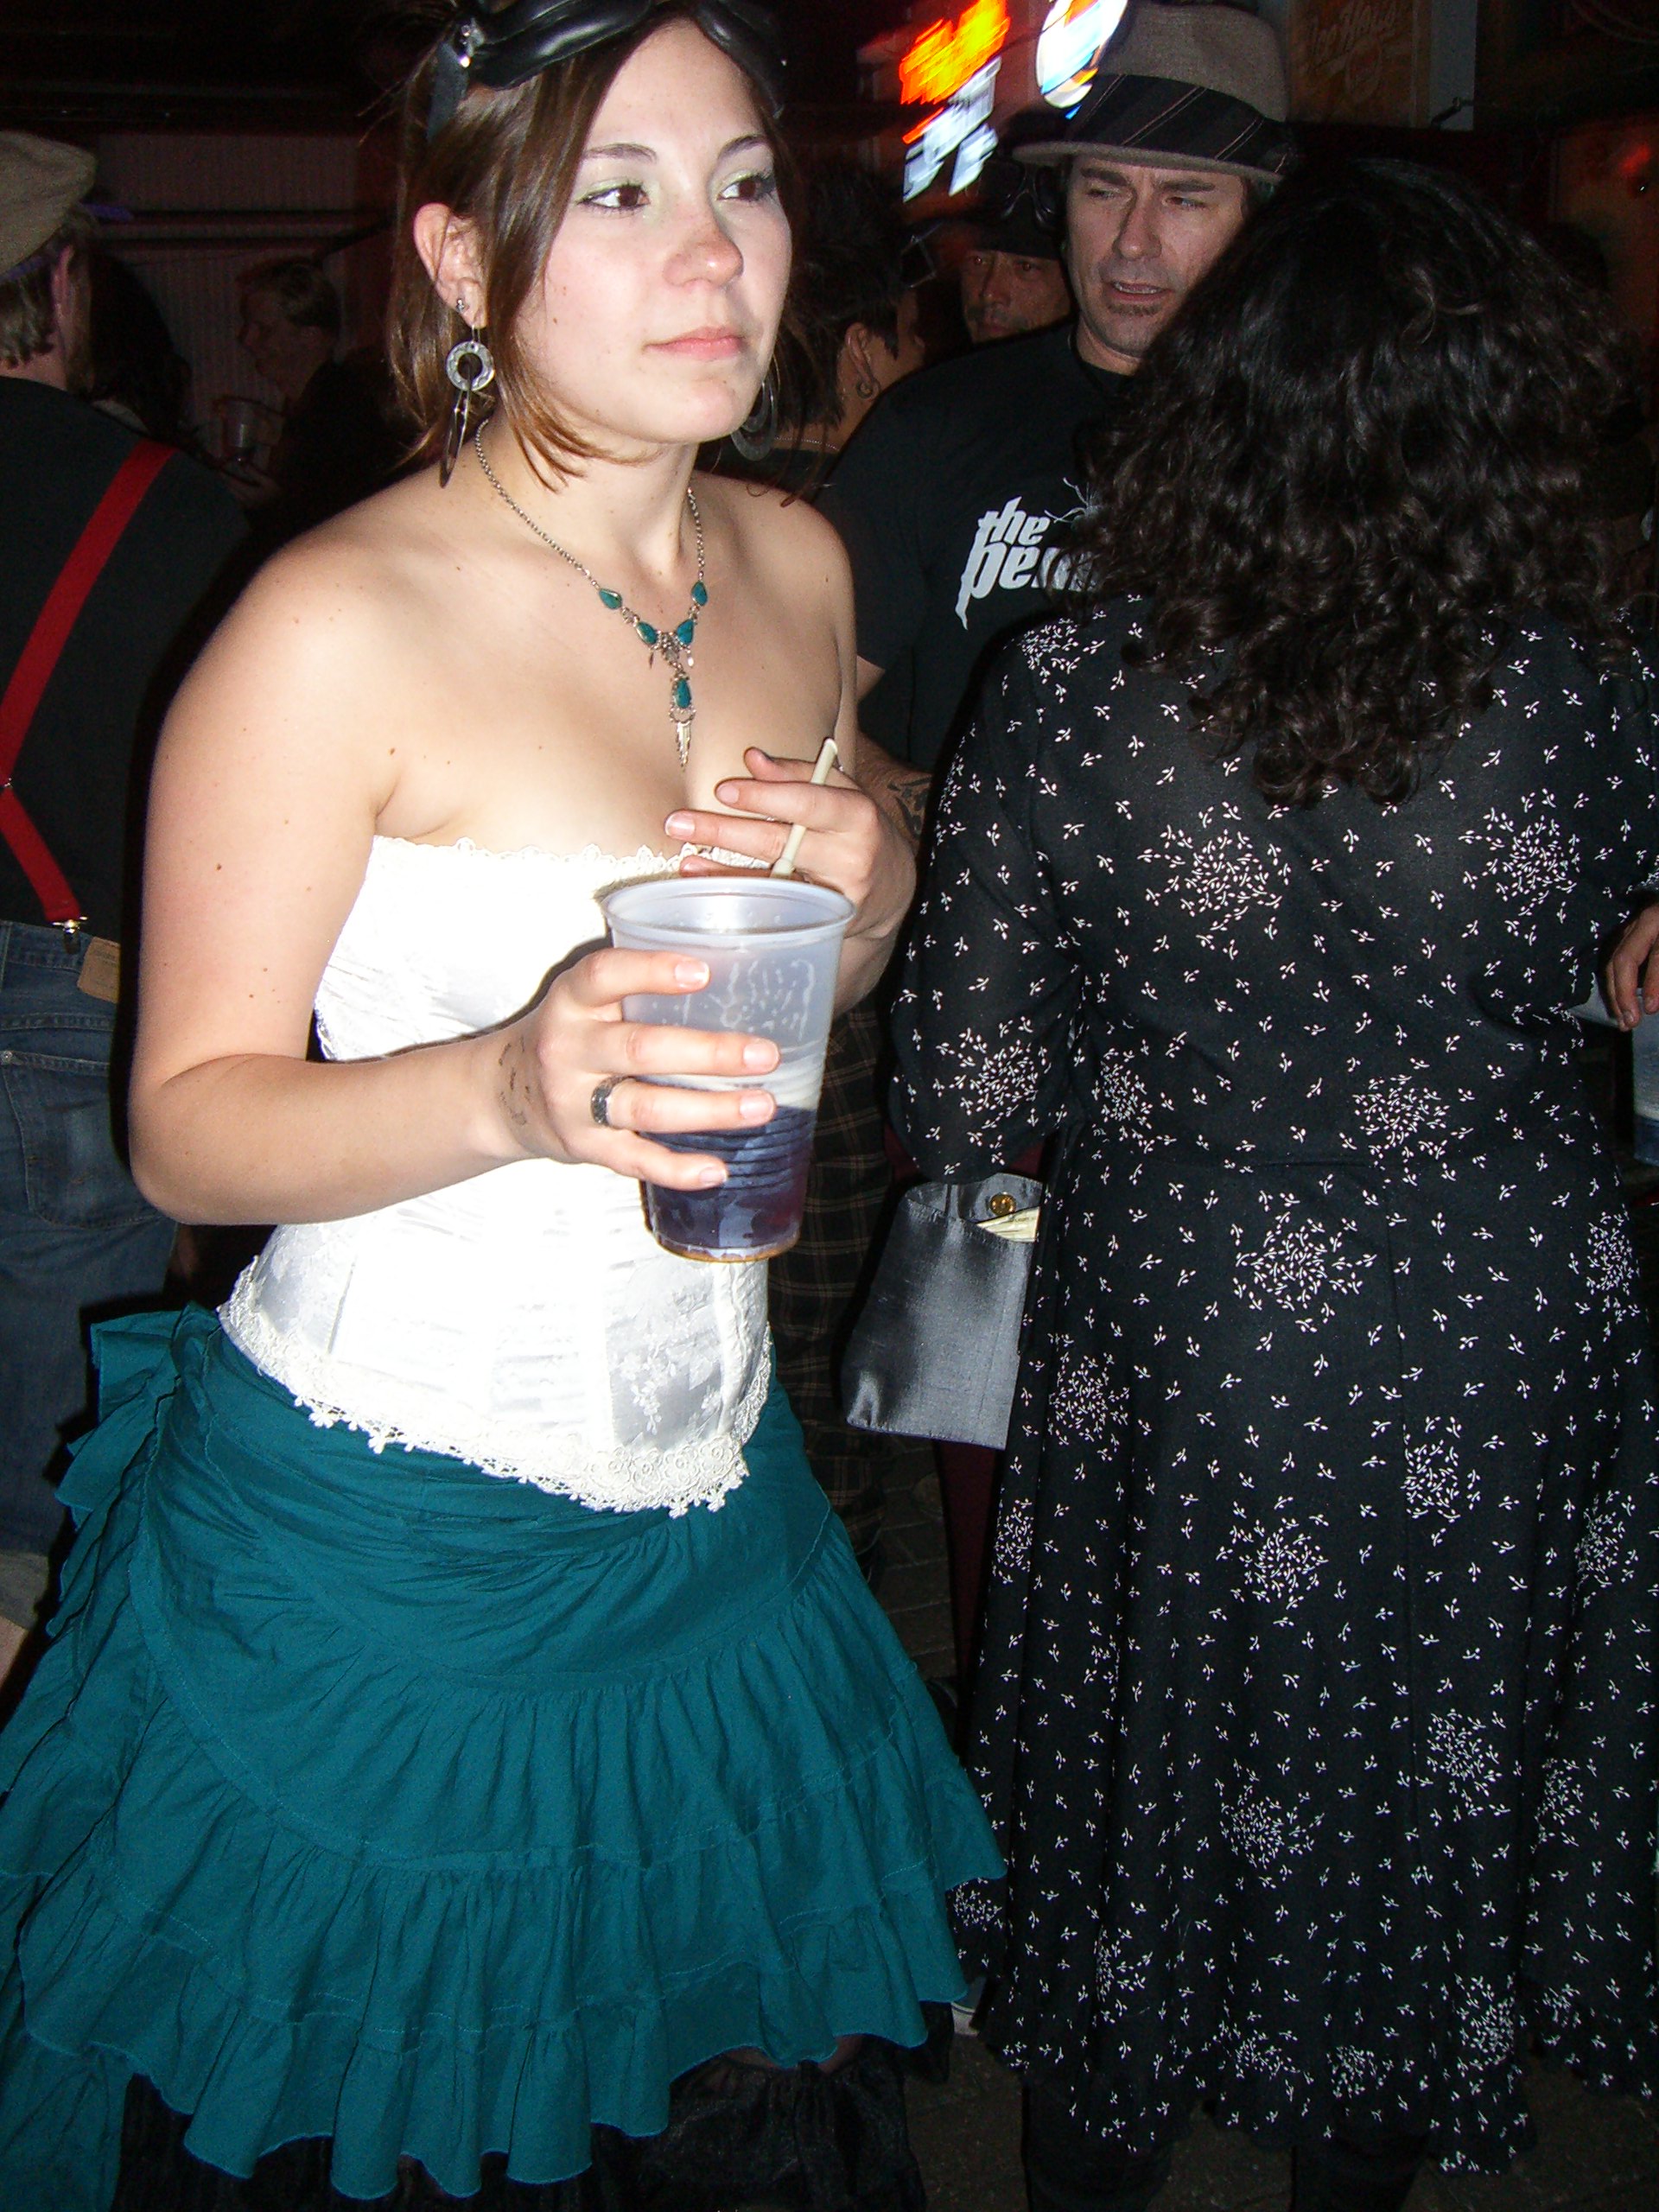 White top, blue ruffles - Steampunk party at SXSW 2007